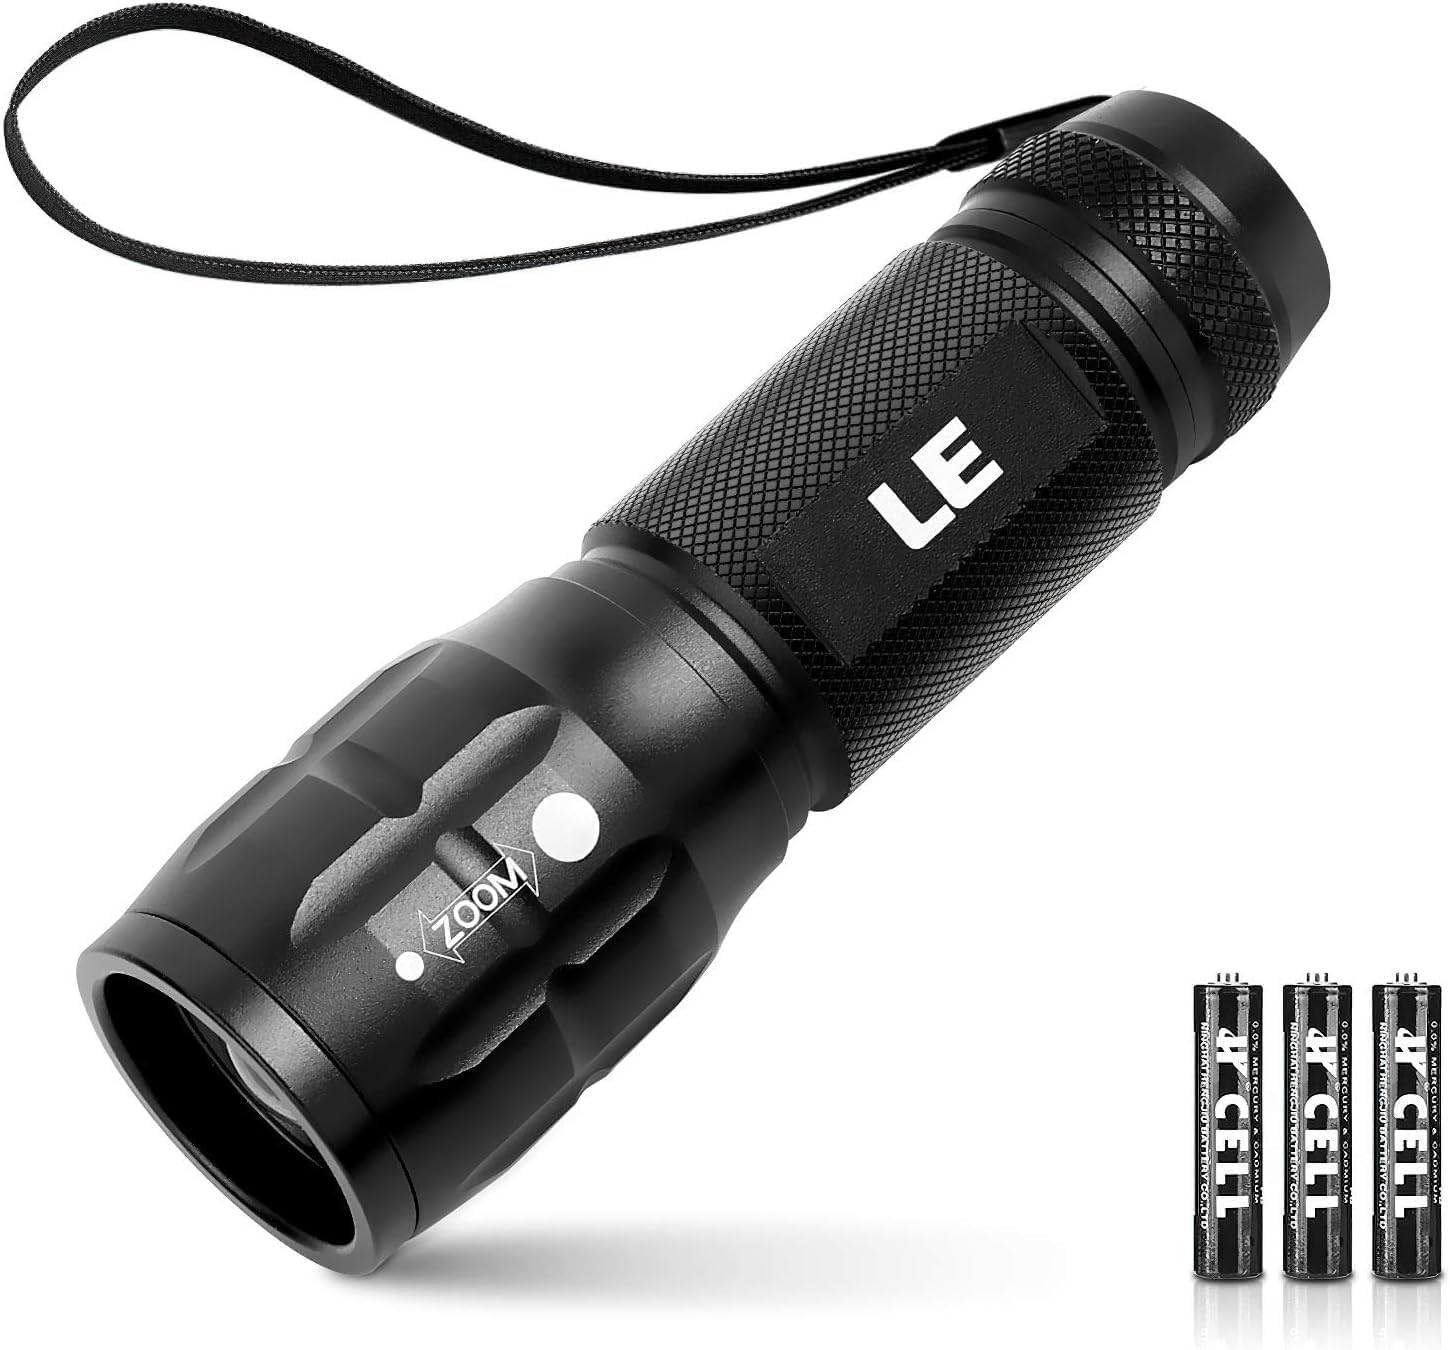 Lighting EVER LED Flashlights High Lumens, Small Flashlight, Zoomable, Waterproof, Adjustable Brightness Flash Light for Outdoor, Emergency, AAA Batteries Included